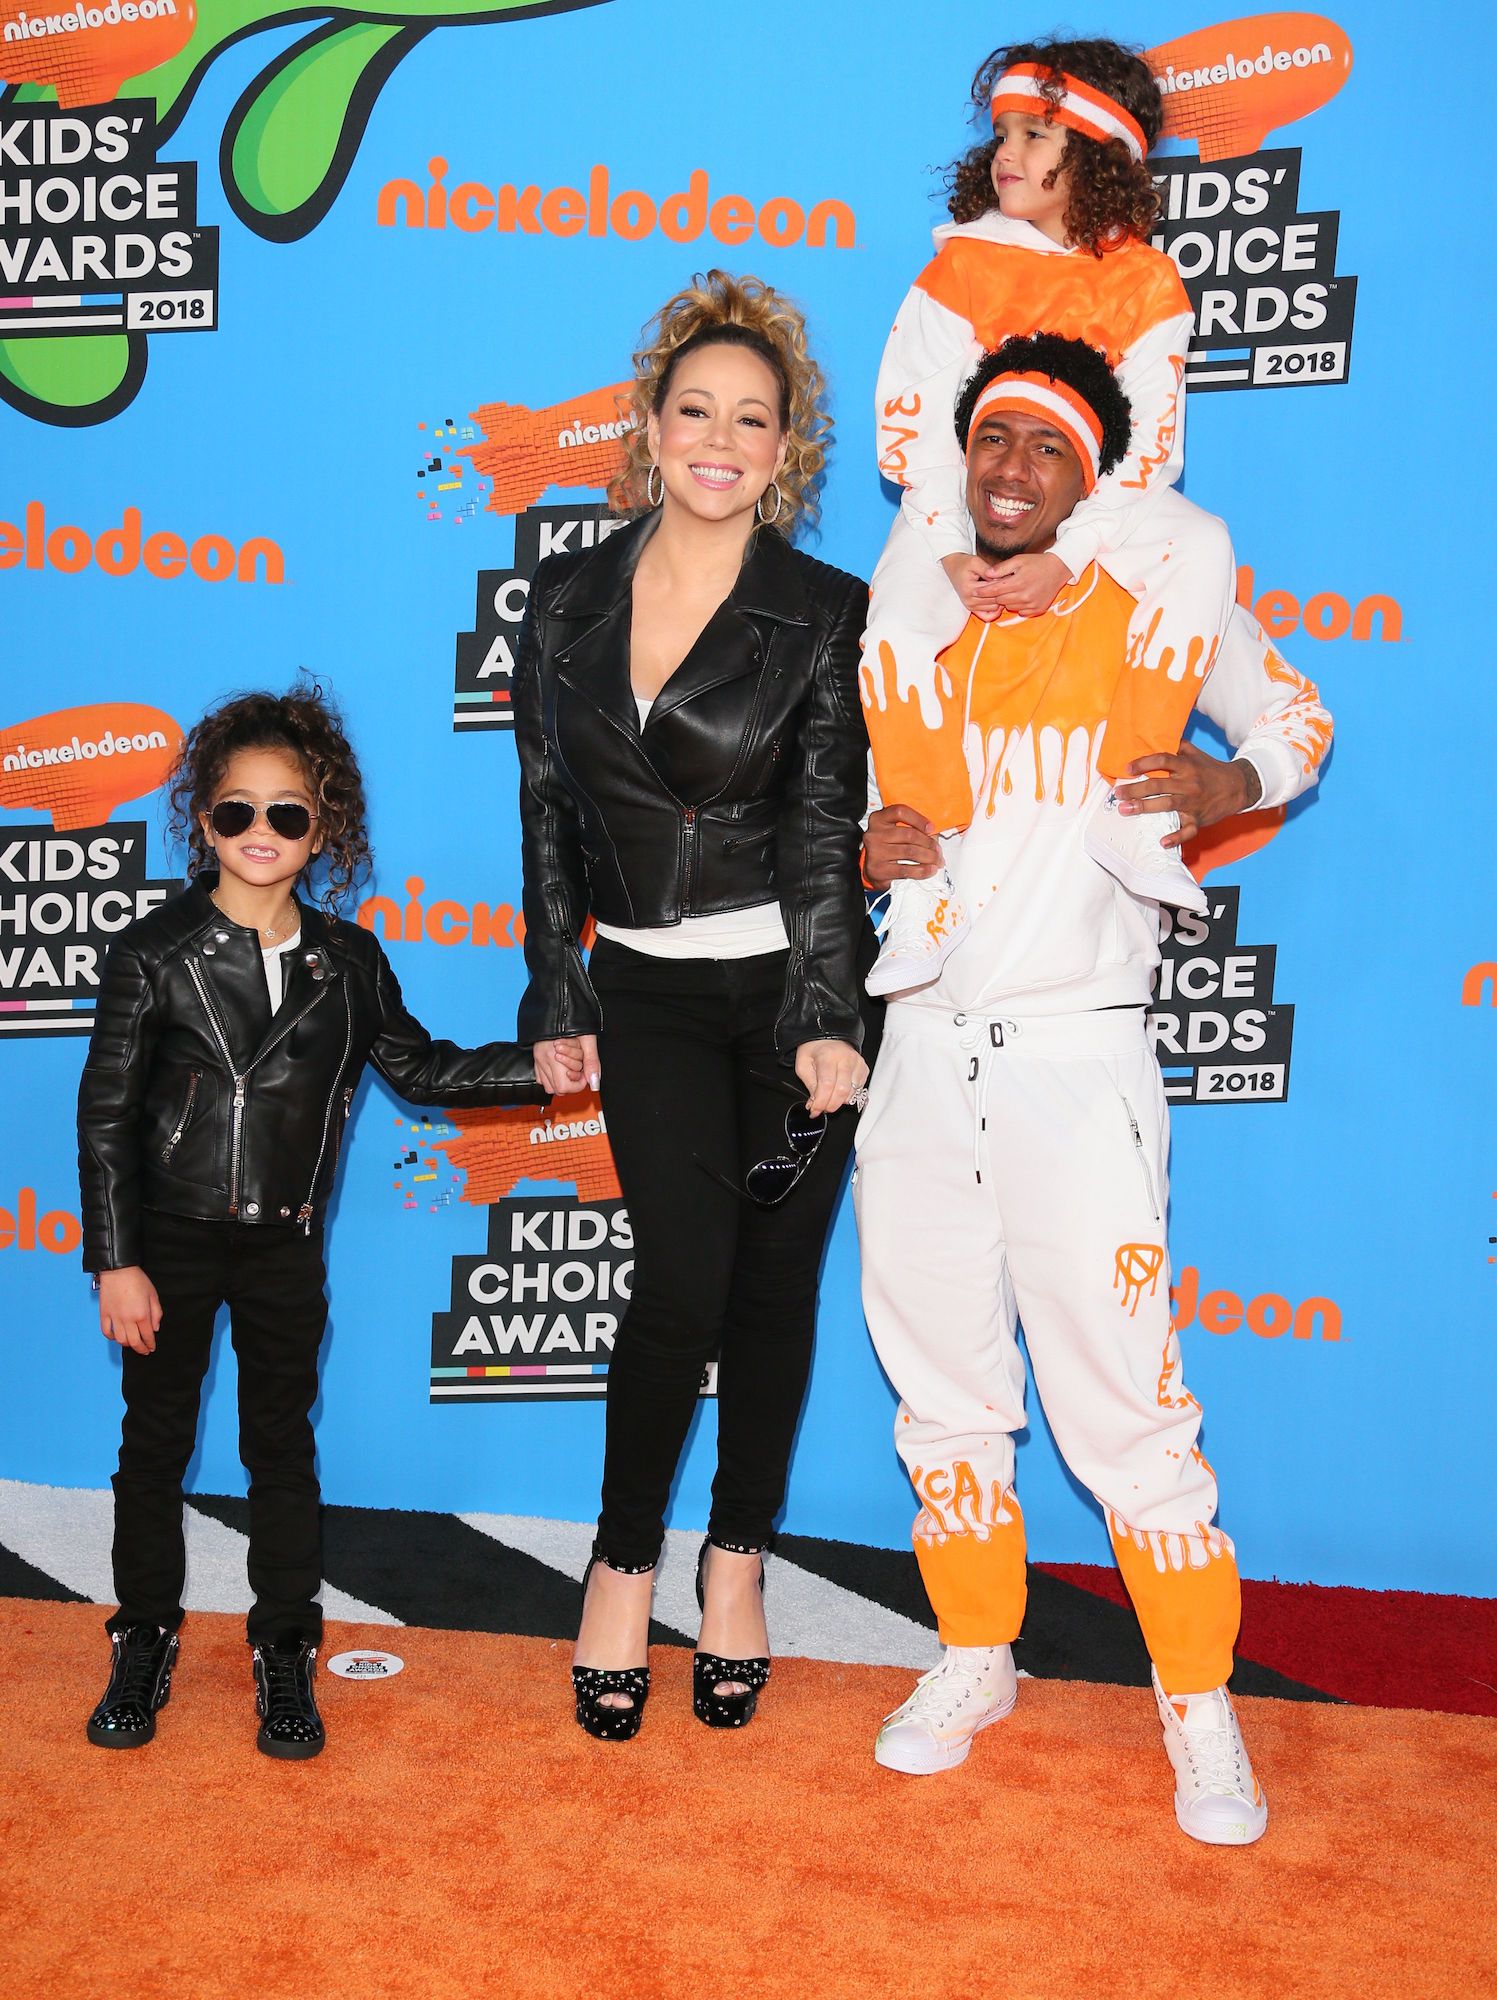 Mariah Carey, Nick Cannon, and their kids